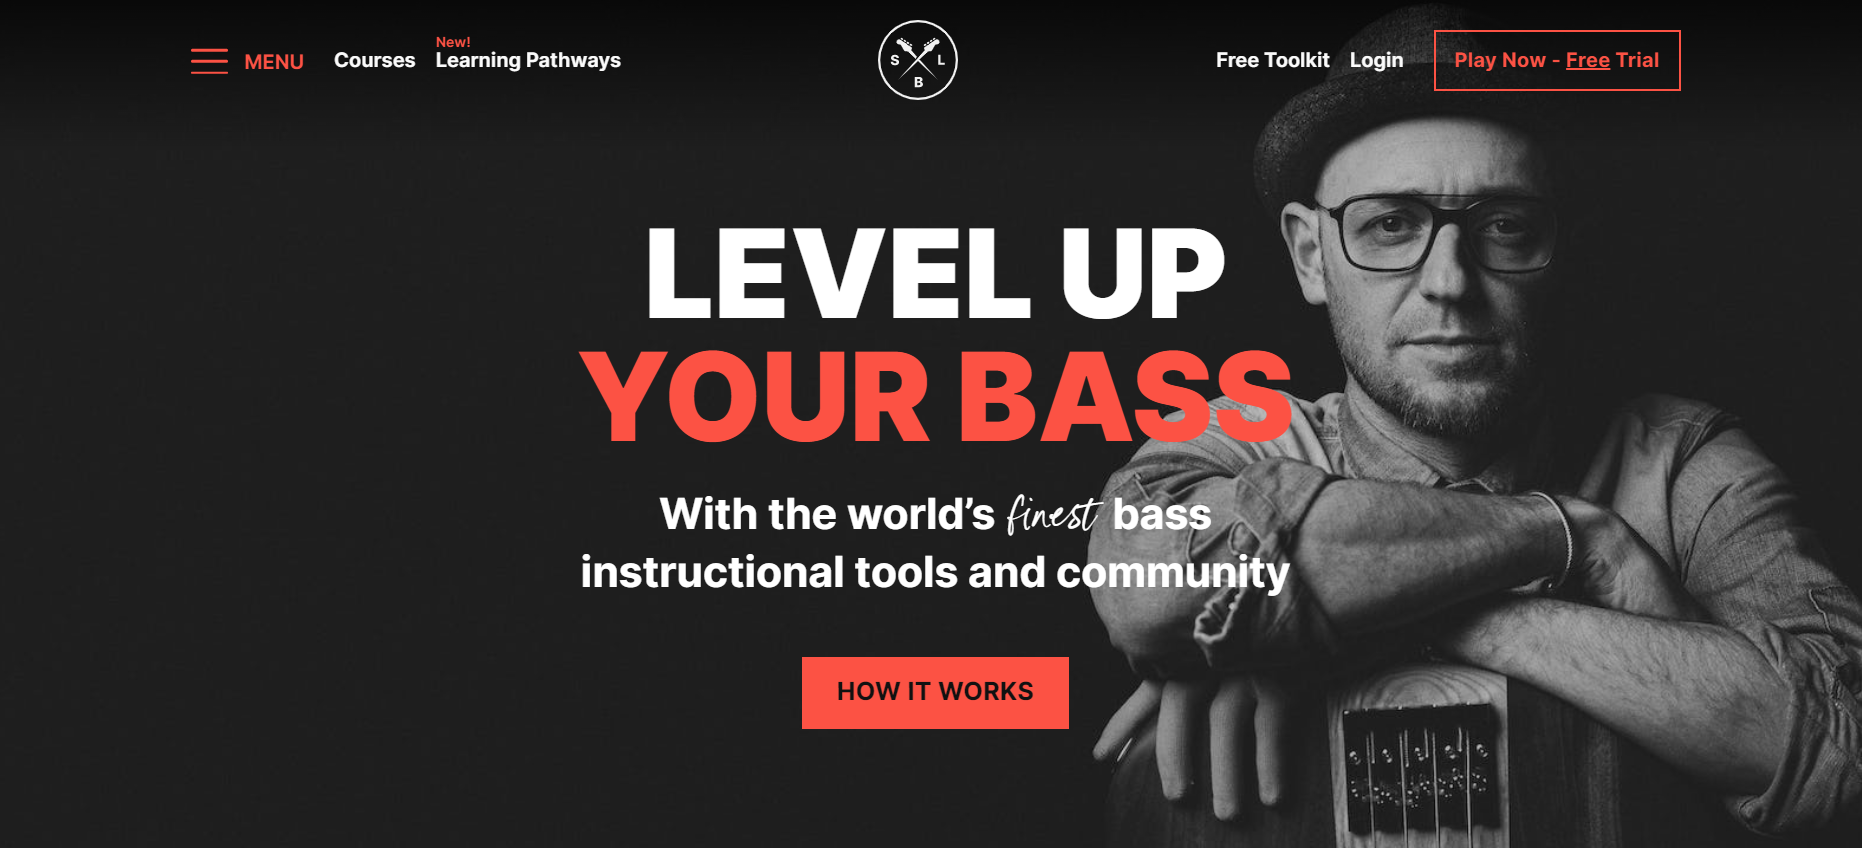 LEVEL UP YOUR BASS